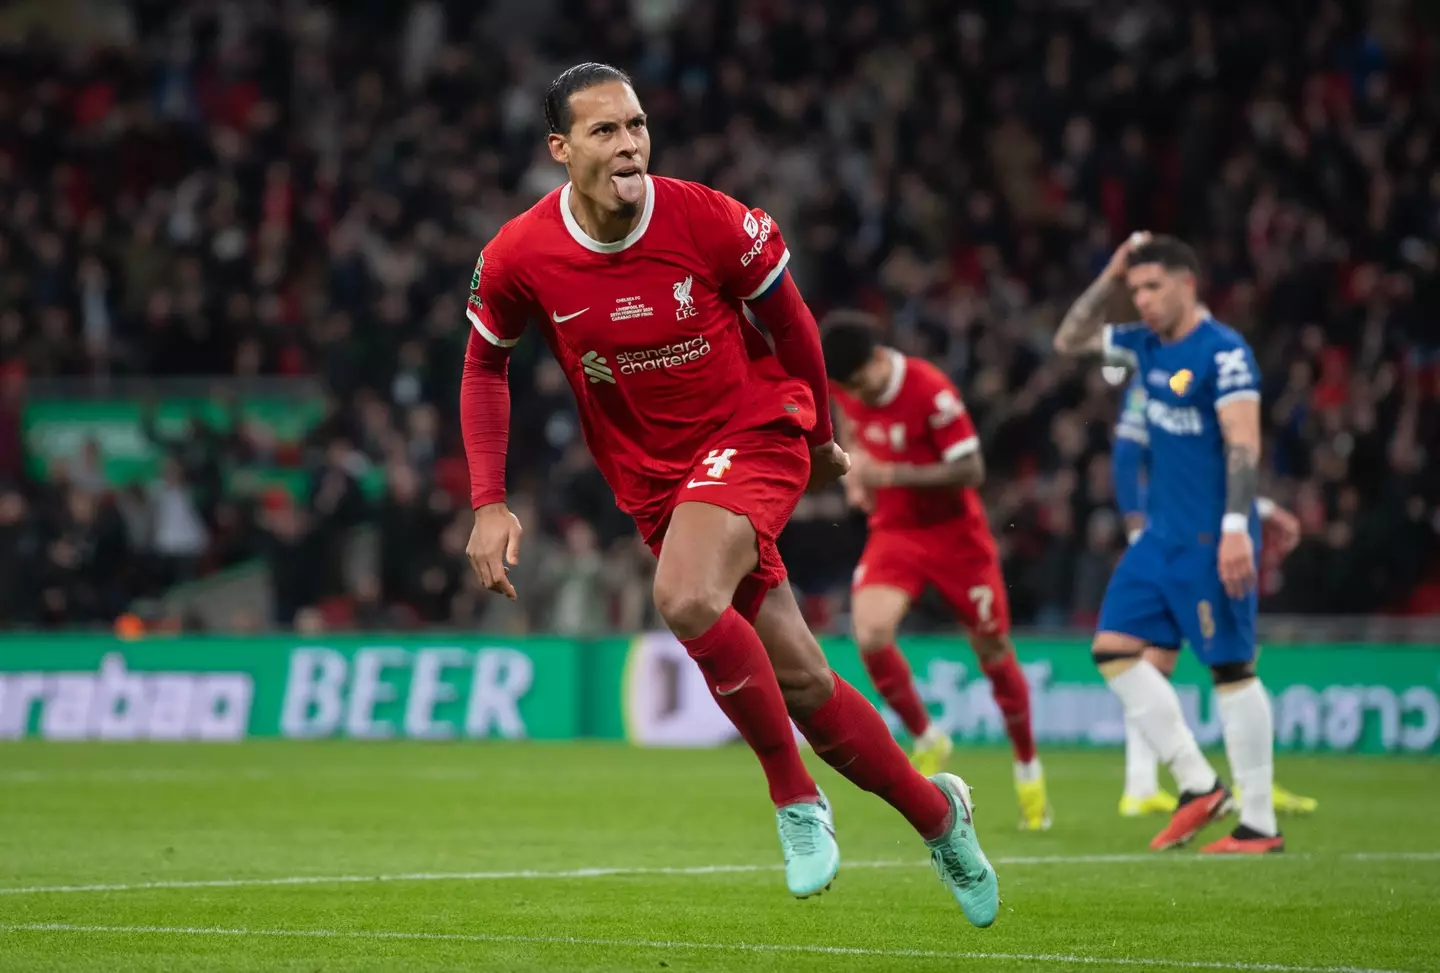 Van Dijk netted a late winner against Chelsea in the Carabao Cup final (Getty)